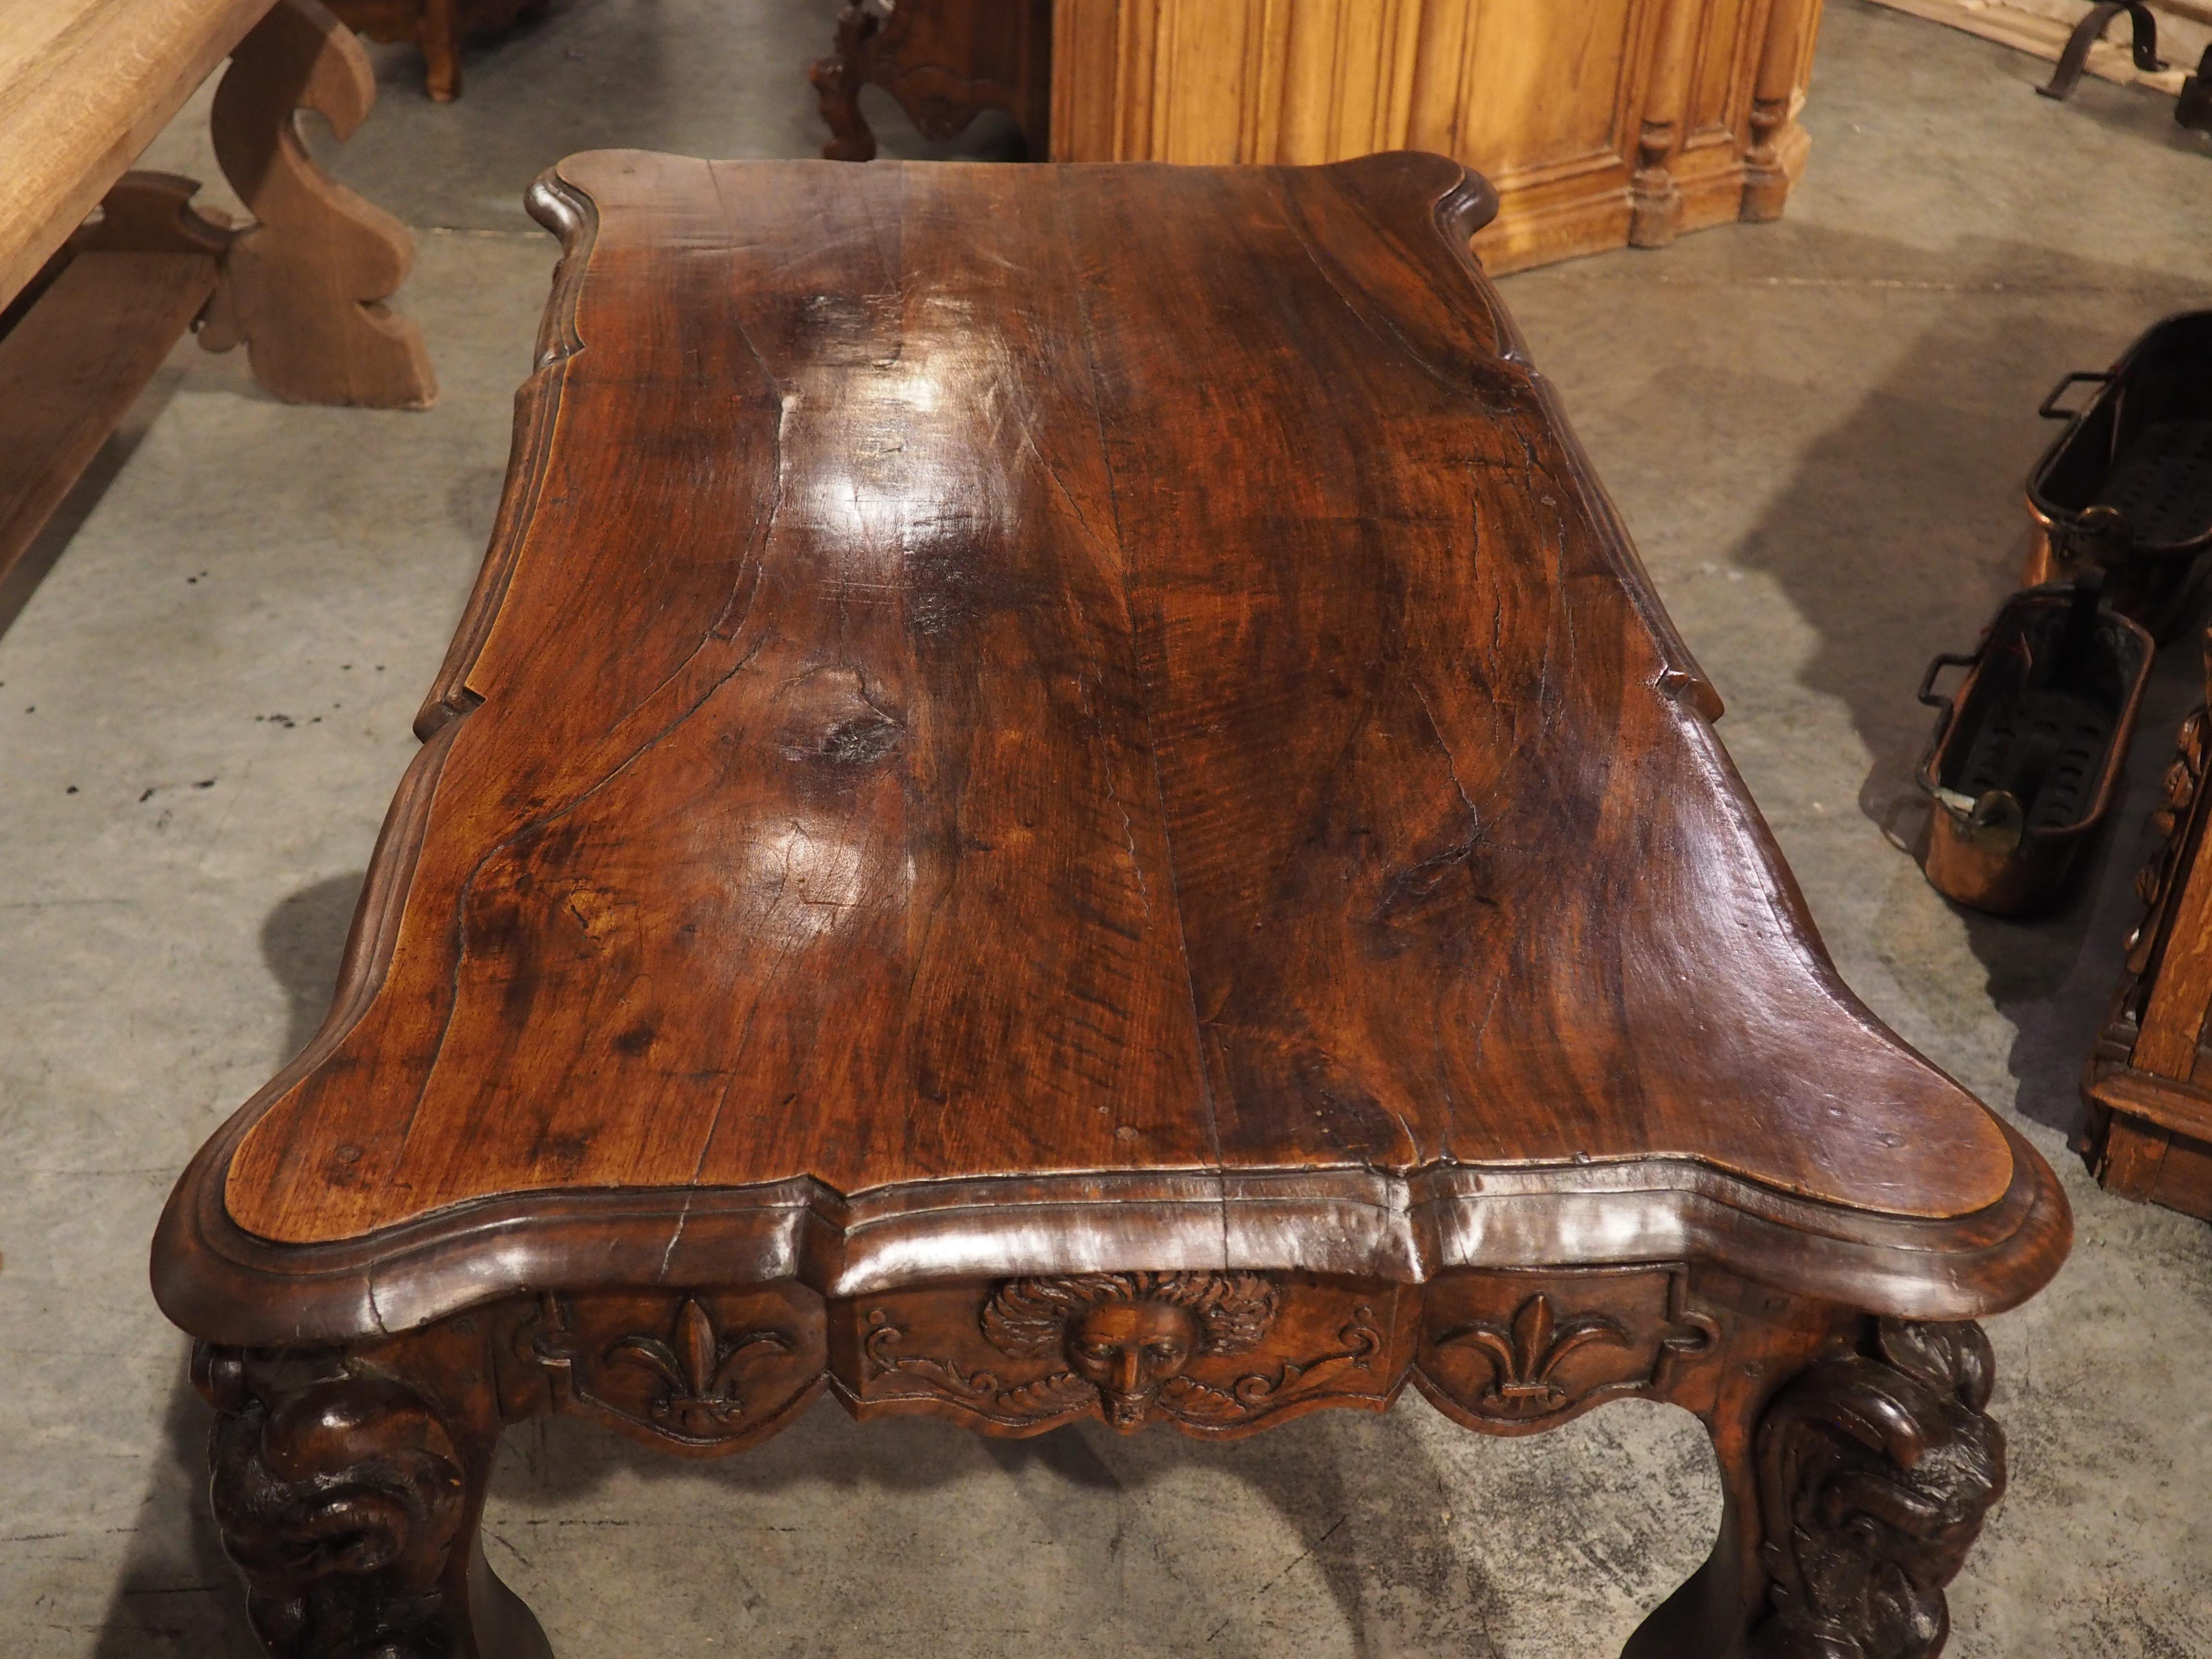 Circa 1870 French Walnut Wood Center Table with Rams' Heads and Fleur De Lys In Good Condition For Sale In Dallas, TX